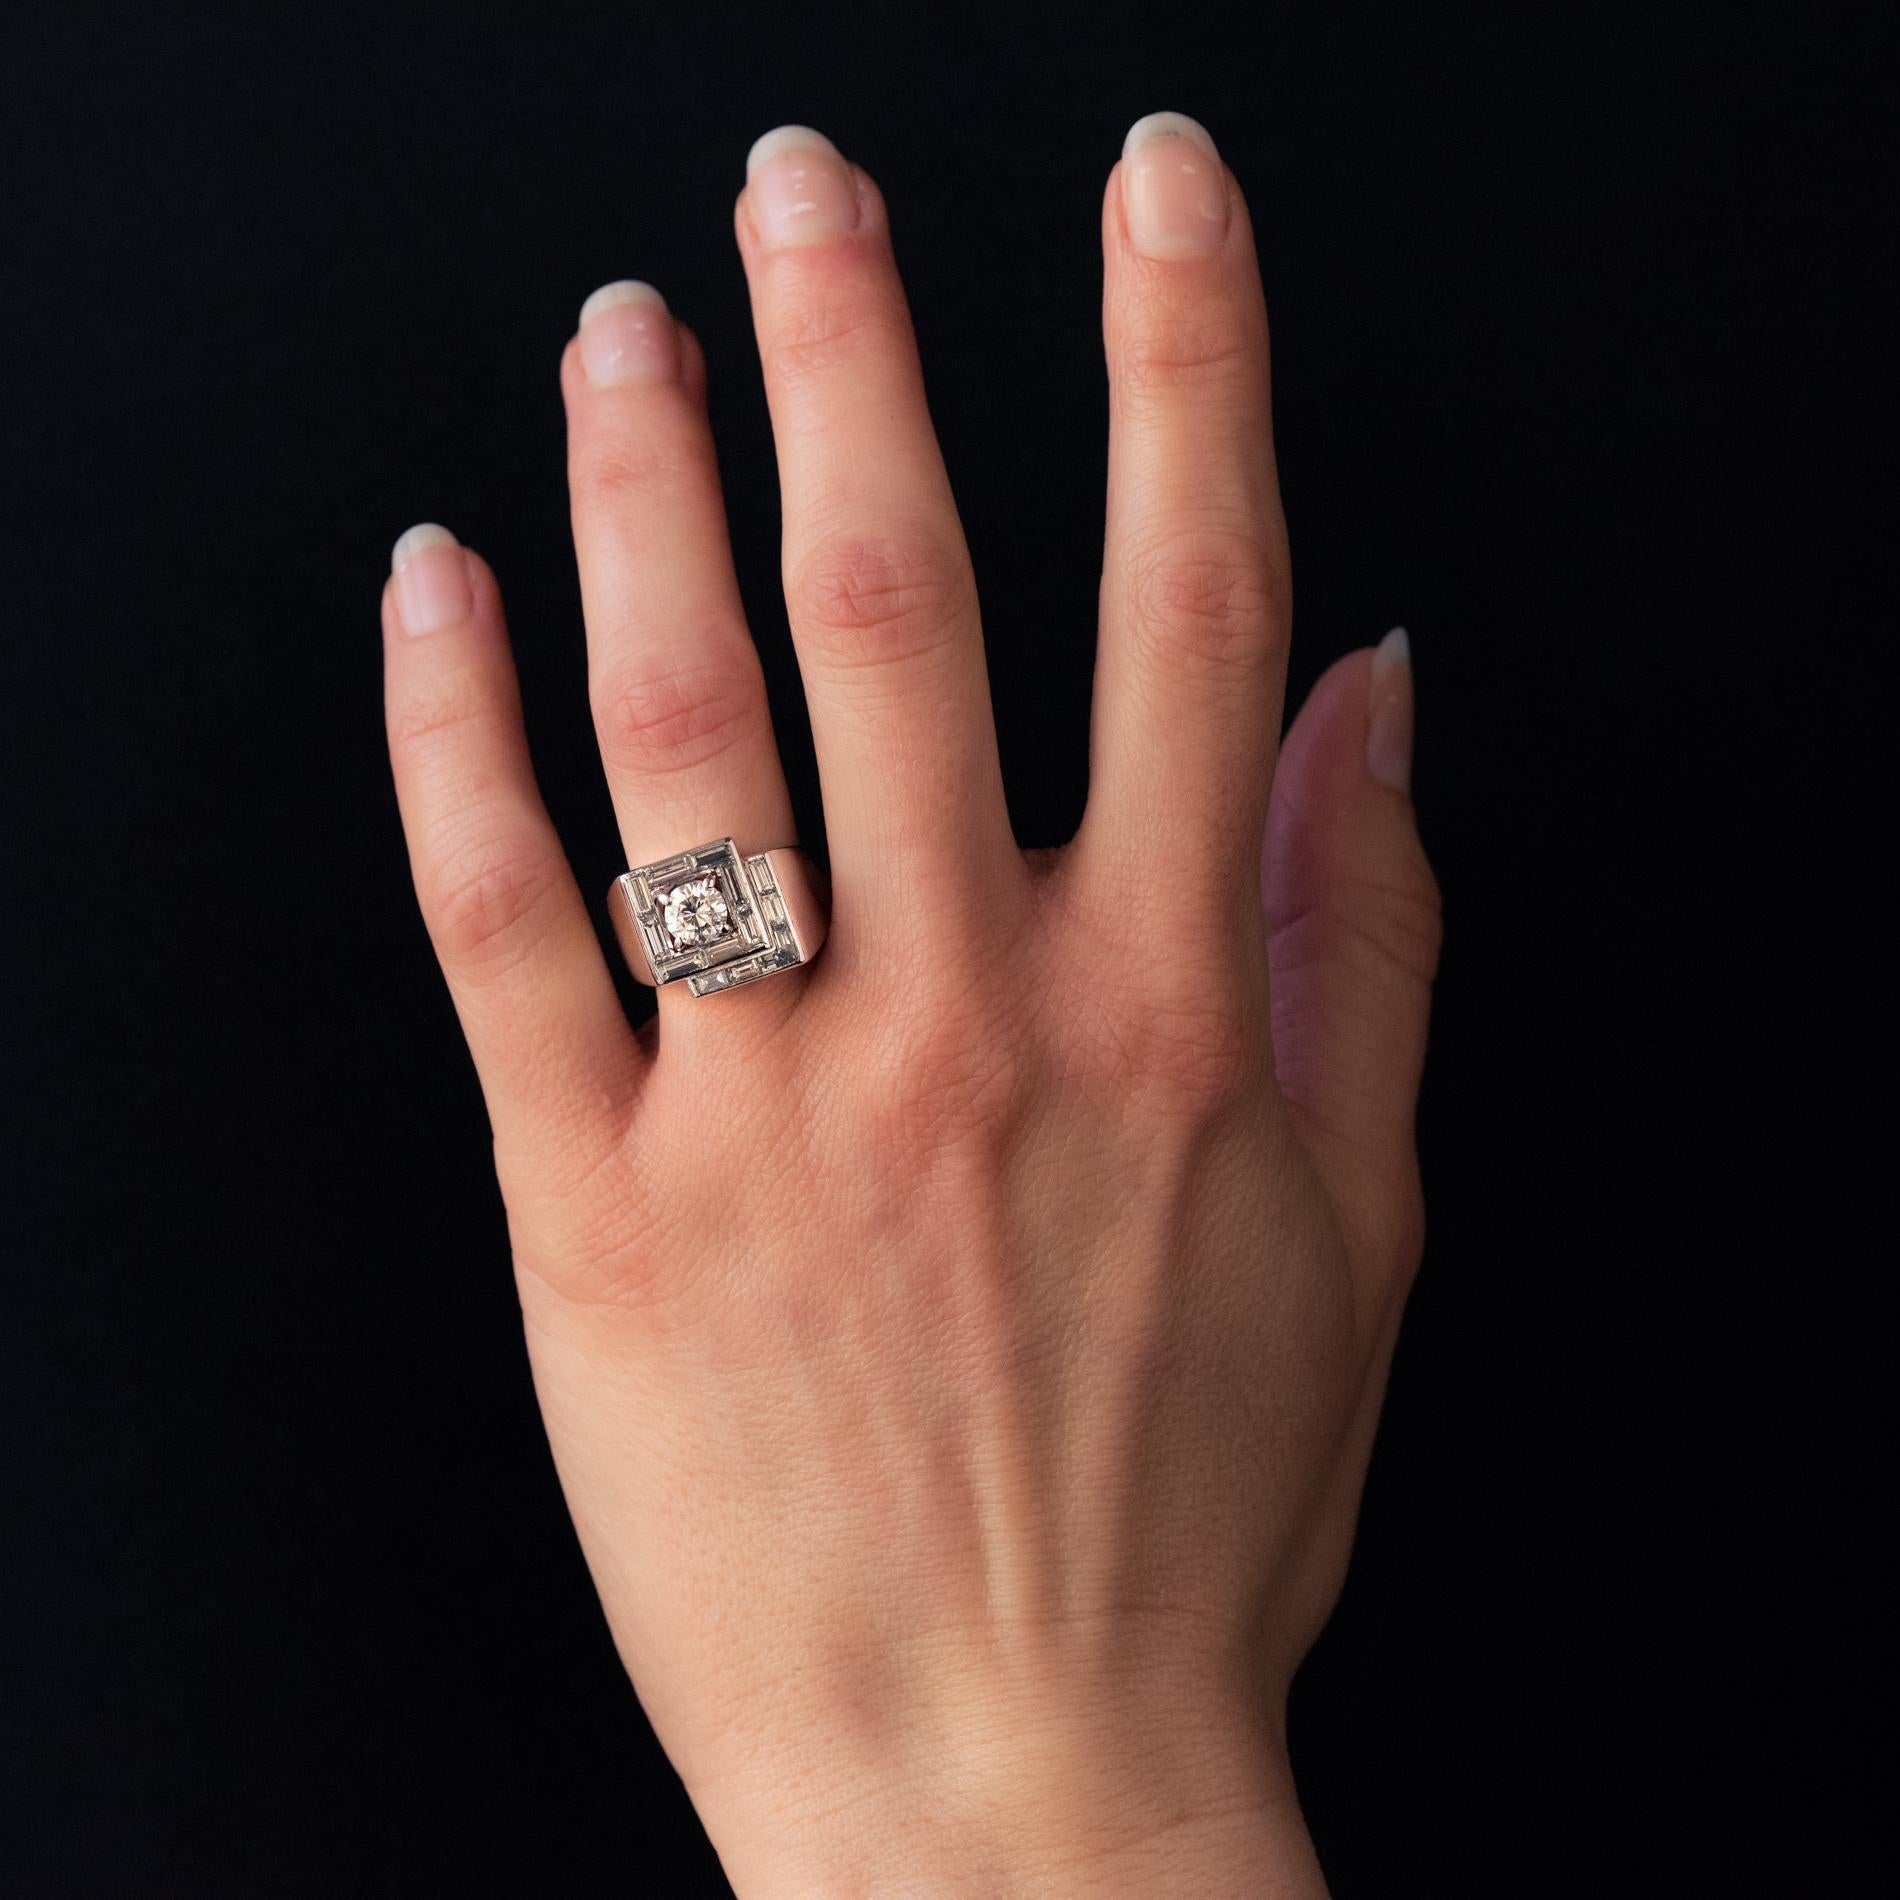 Ring in platinum, dog's head hallmark.
Square shaped, this superb Art Deco ring is adorned with a brilliant-cut diamond, surrounded by baguette-cut diamonds. Asymmetrically, a half-square located below is set with baguette-cut diamonds recalling the